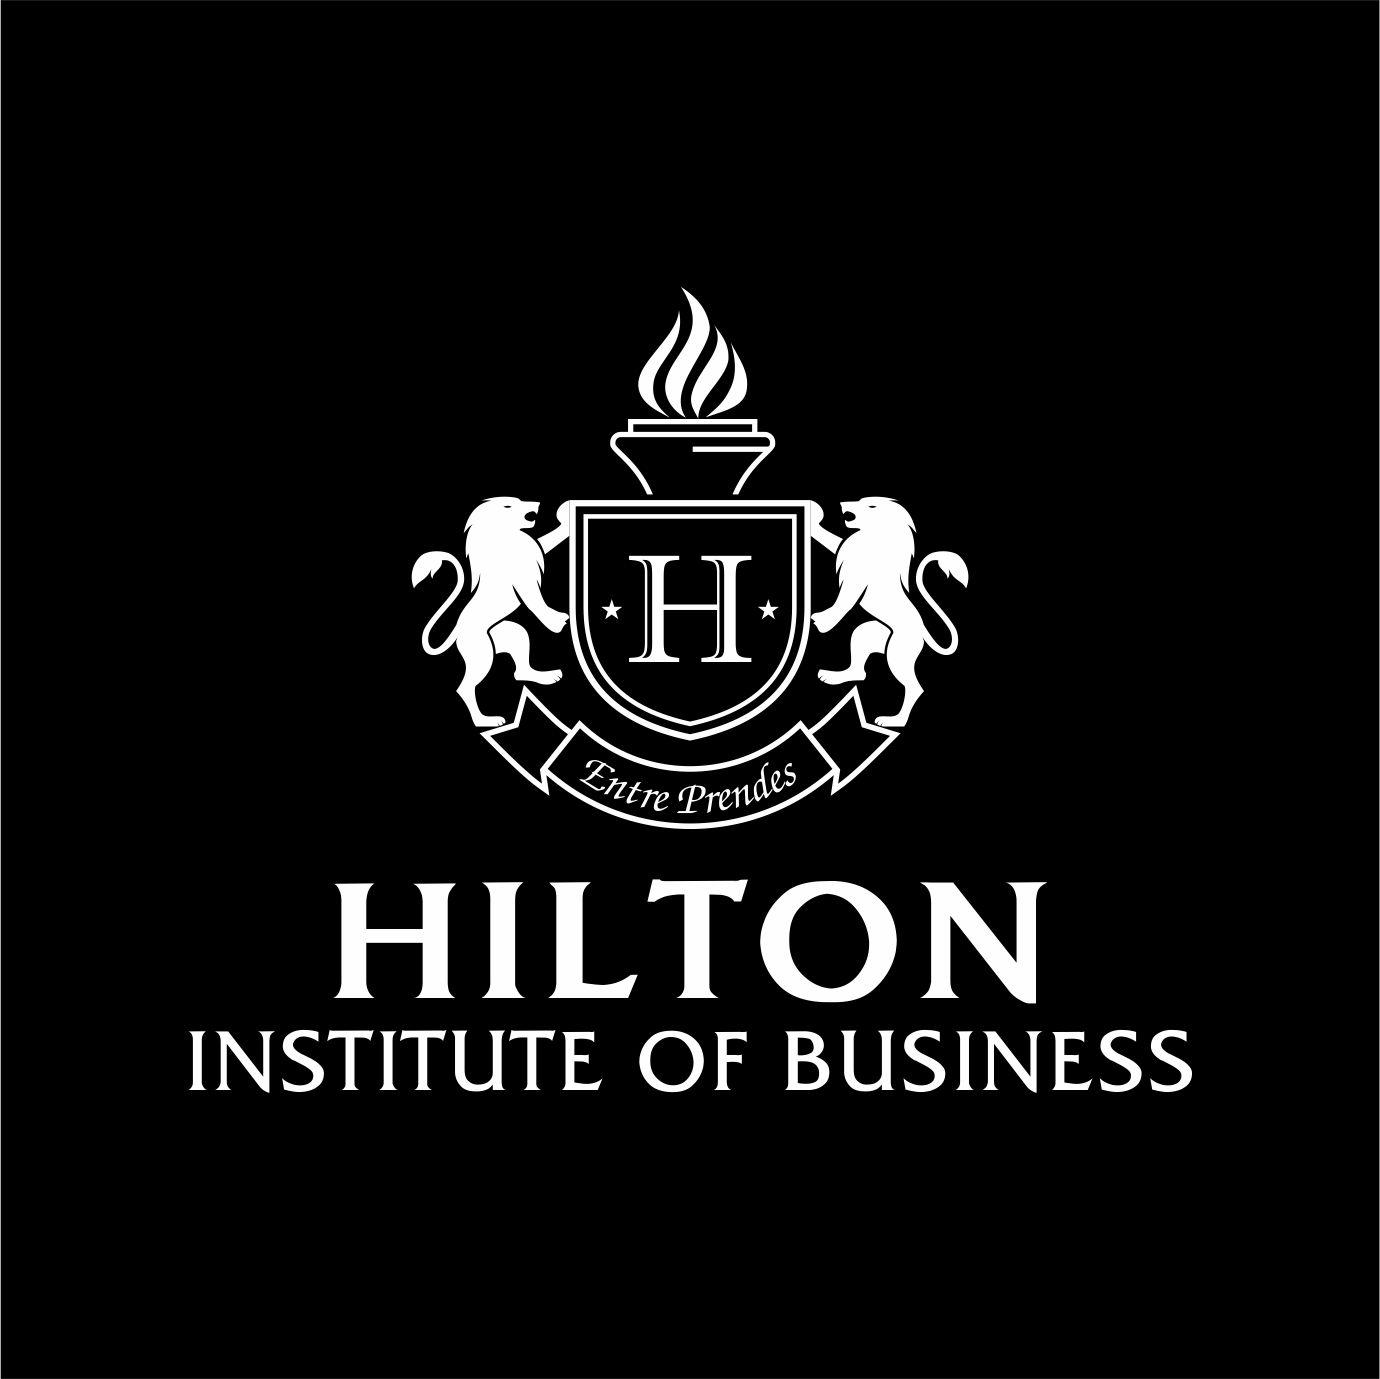 Las Vegas Business Owners & Entrepreneurs: Grow Your Business & Raise Capital Shark Tank Style with the Hilton Institute Business Growth Workshop